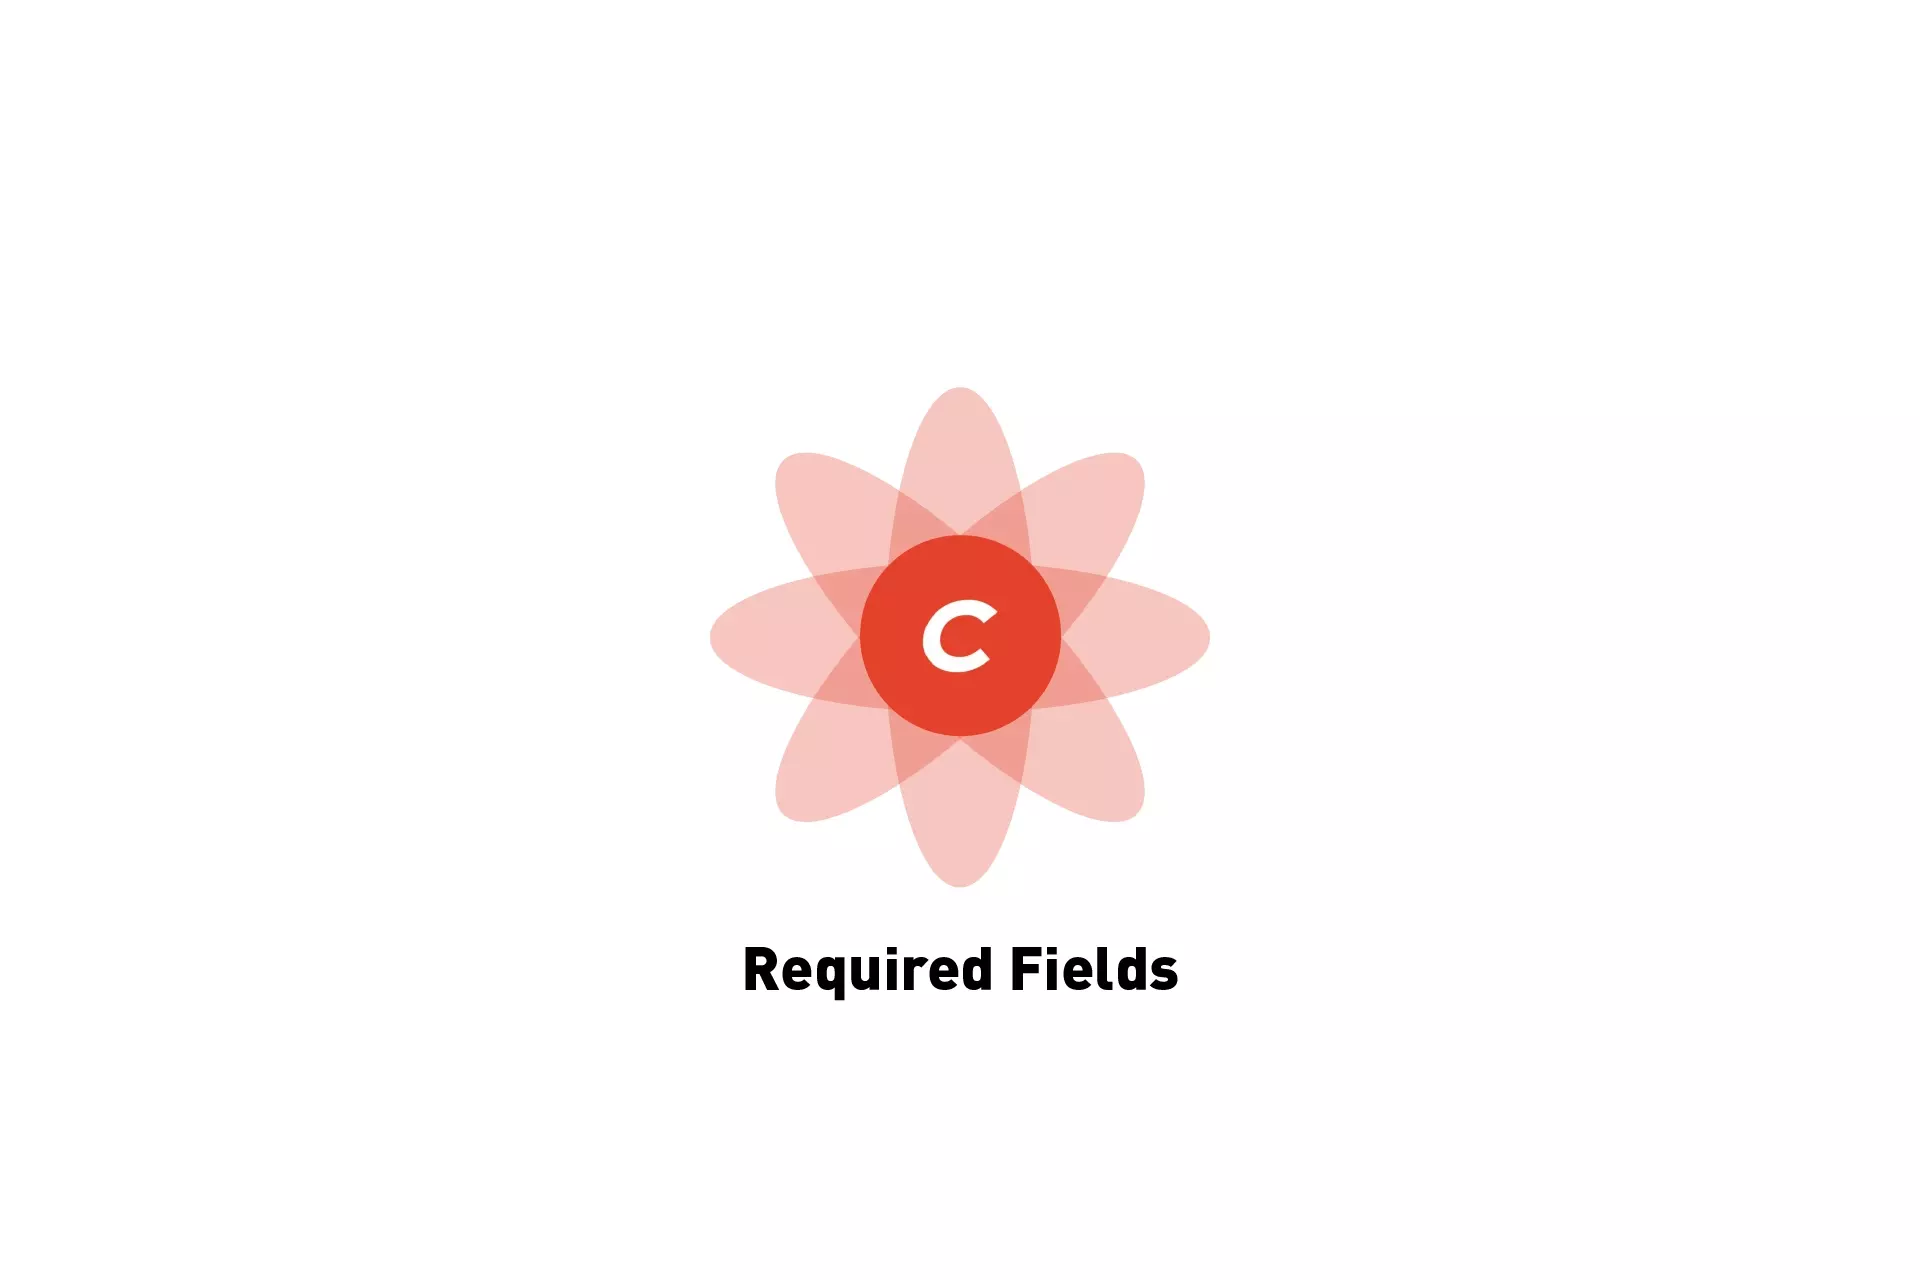 A flower that represents Craft CMS with the text "Required Fields" beneath it.